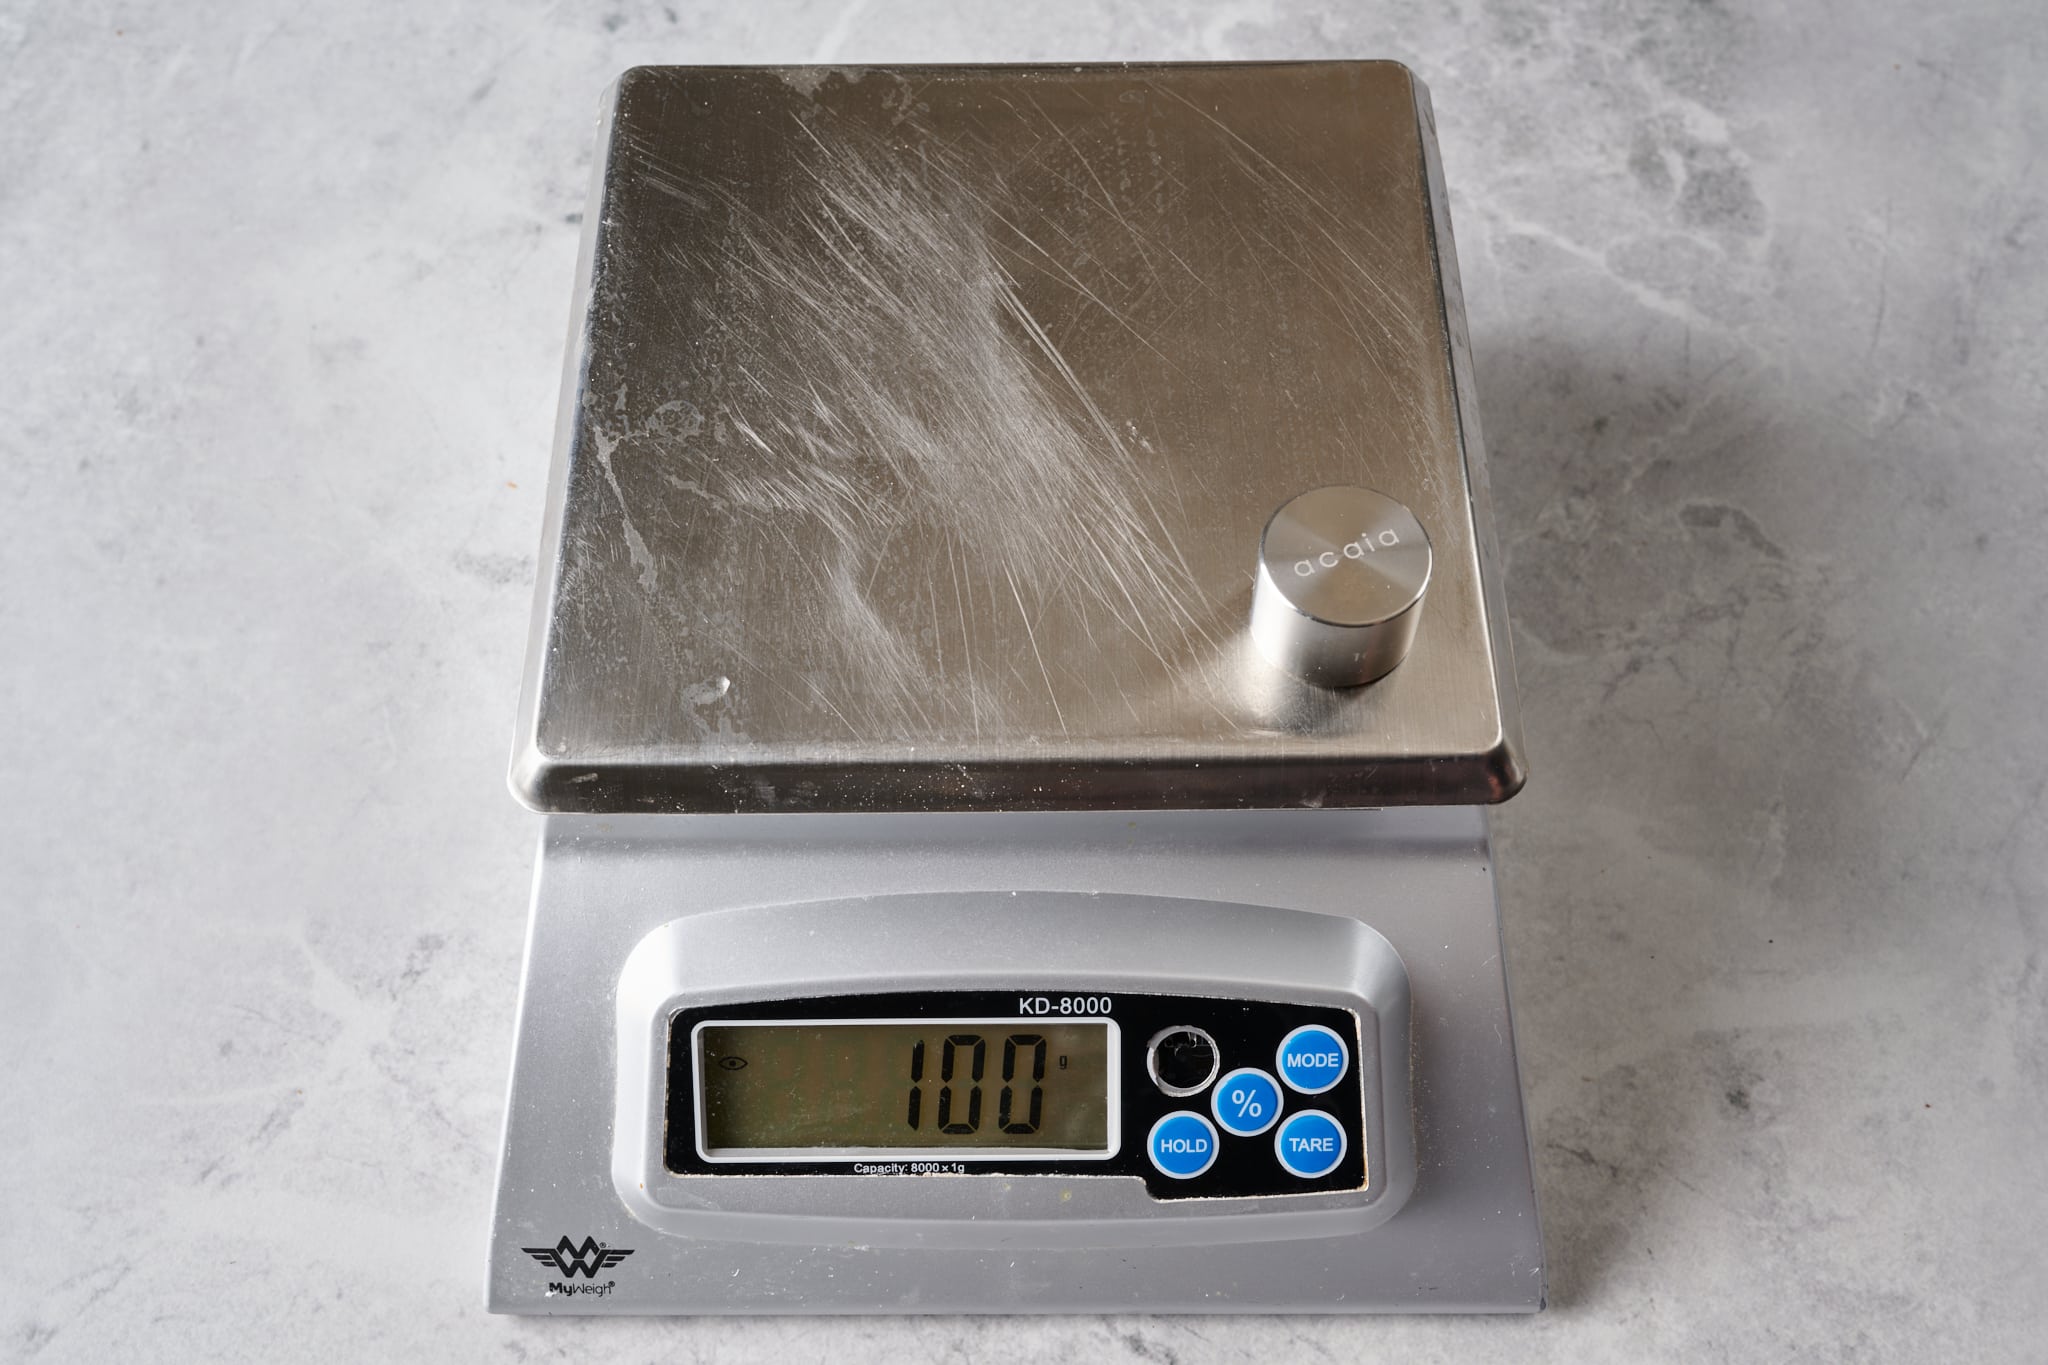 https://www.theperfectloaf.com/wp-content/uploads/2023/01/theperfectloaf_best_kitchen_scale_for_making_bread-5.jpg